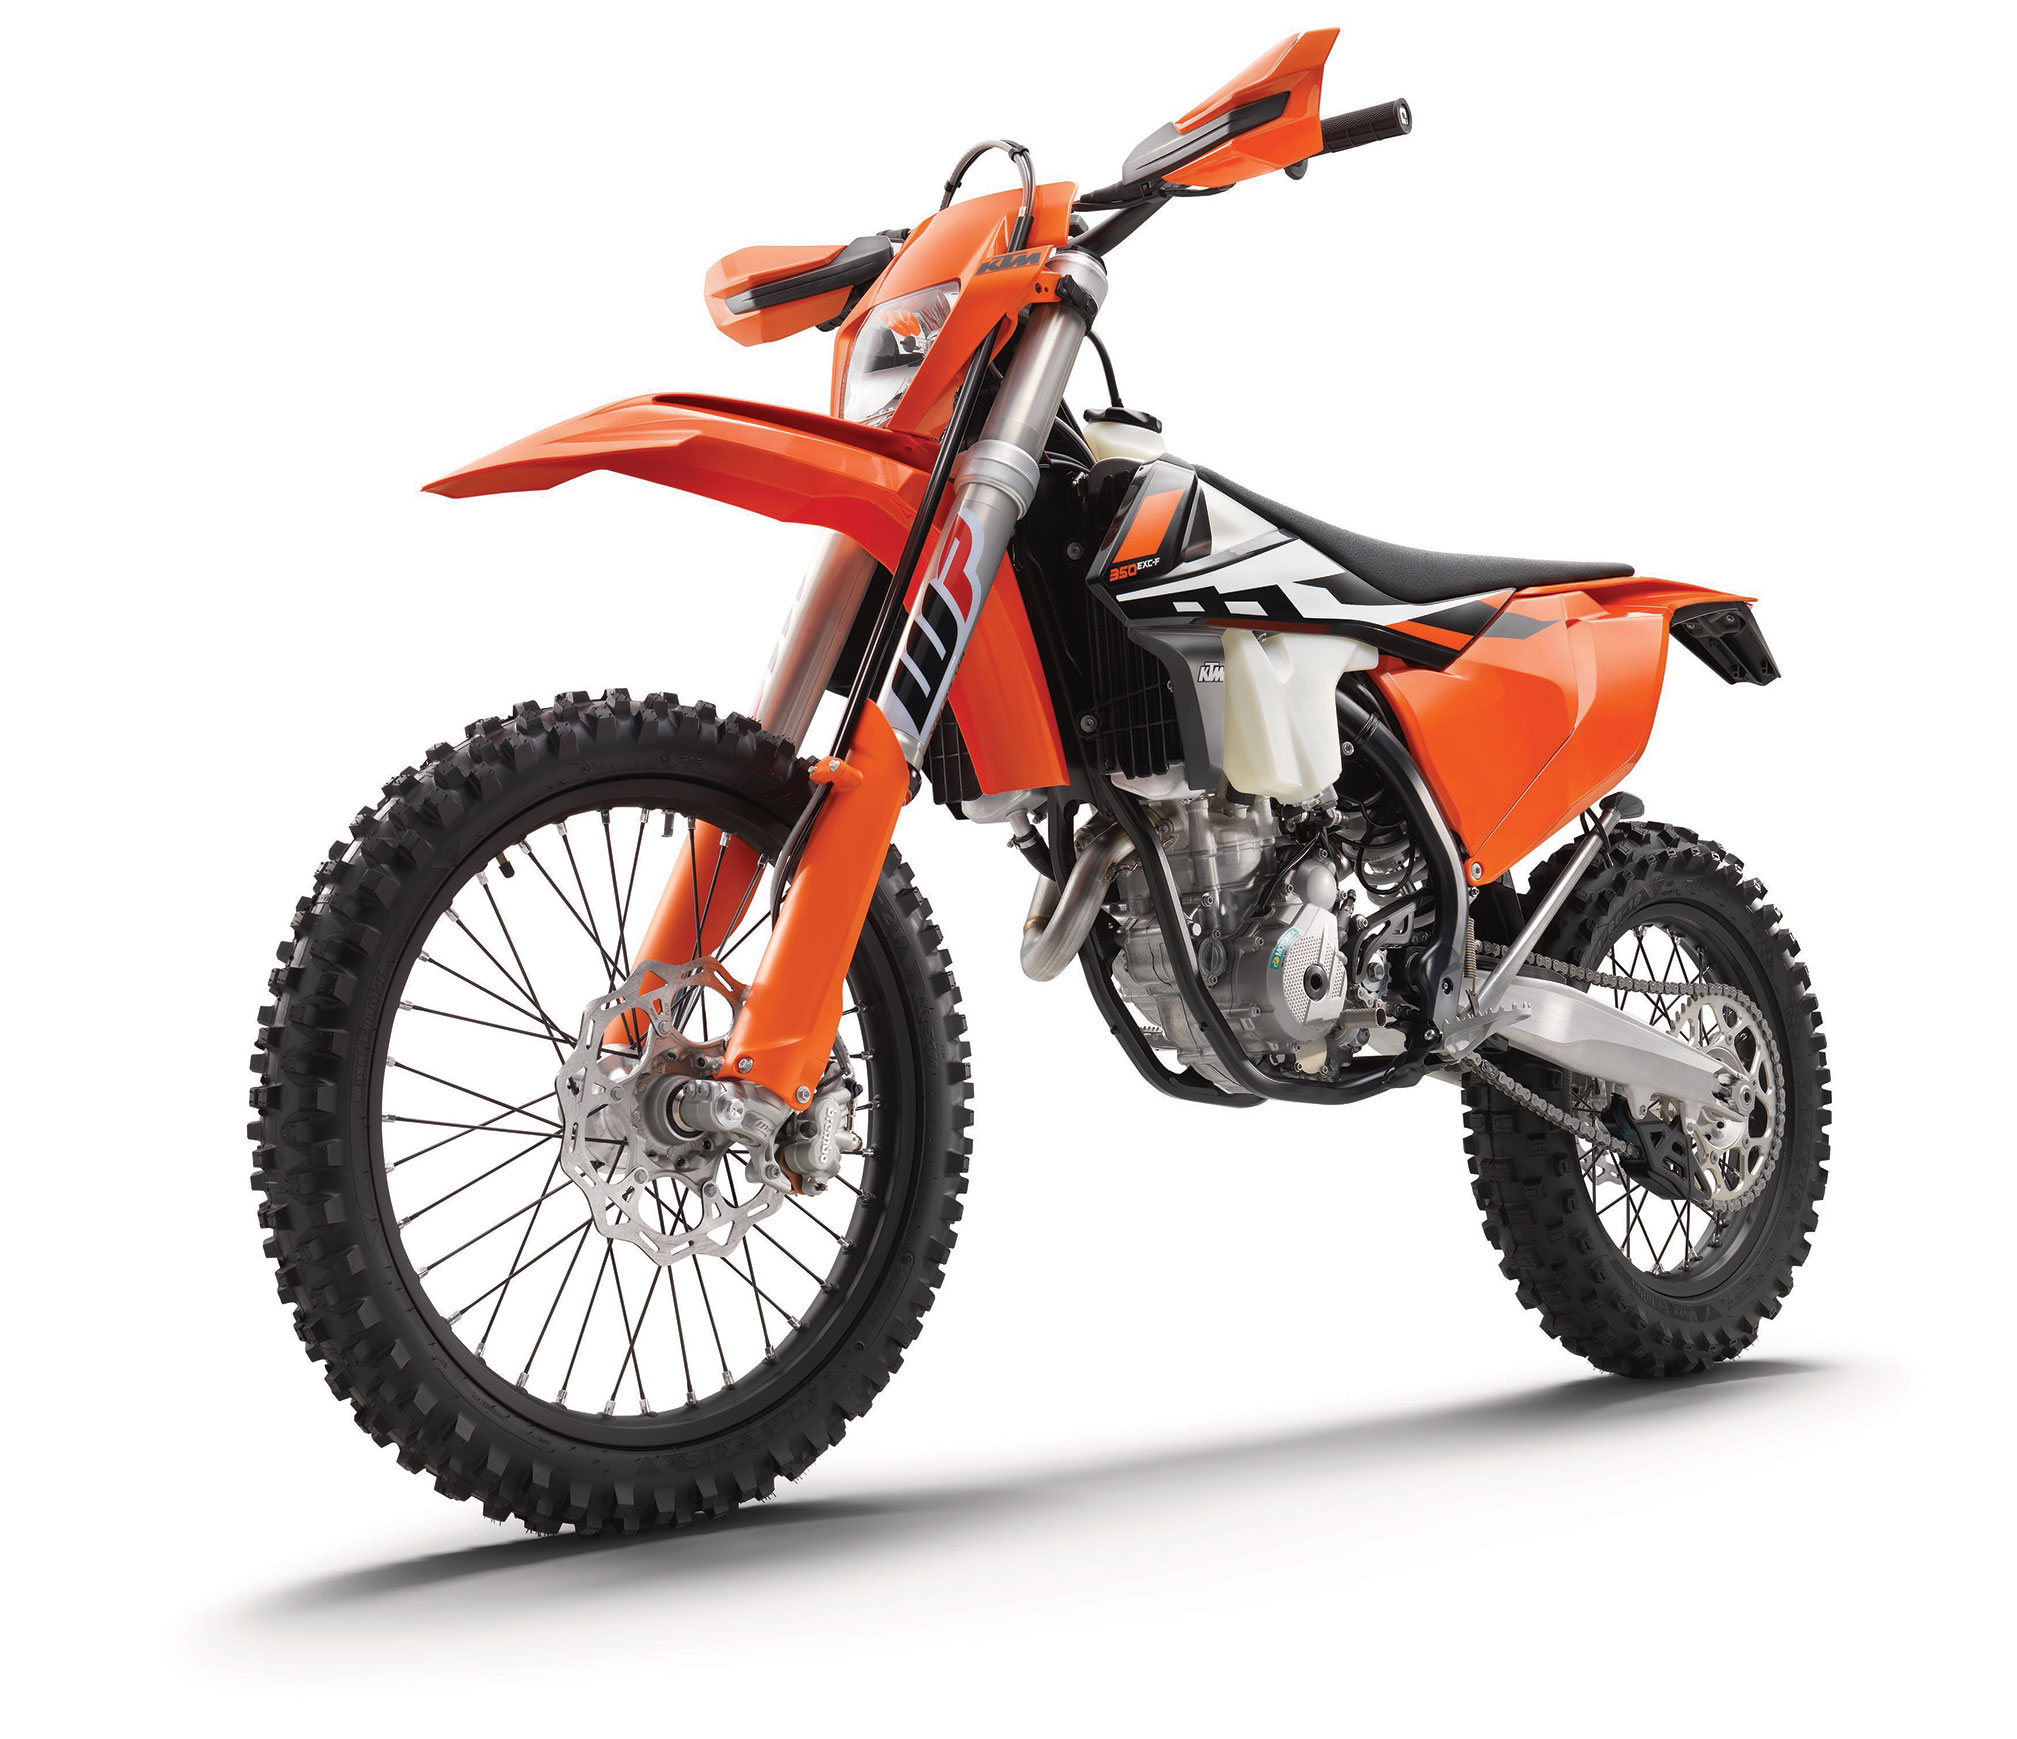 2017 KTM 350 EXC-F Review